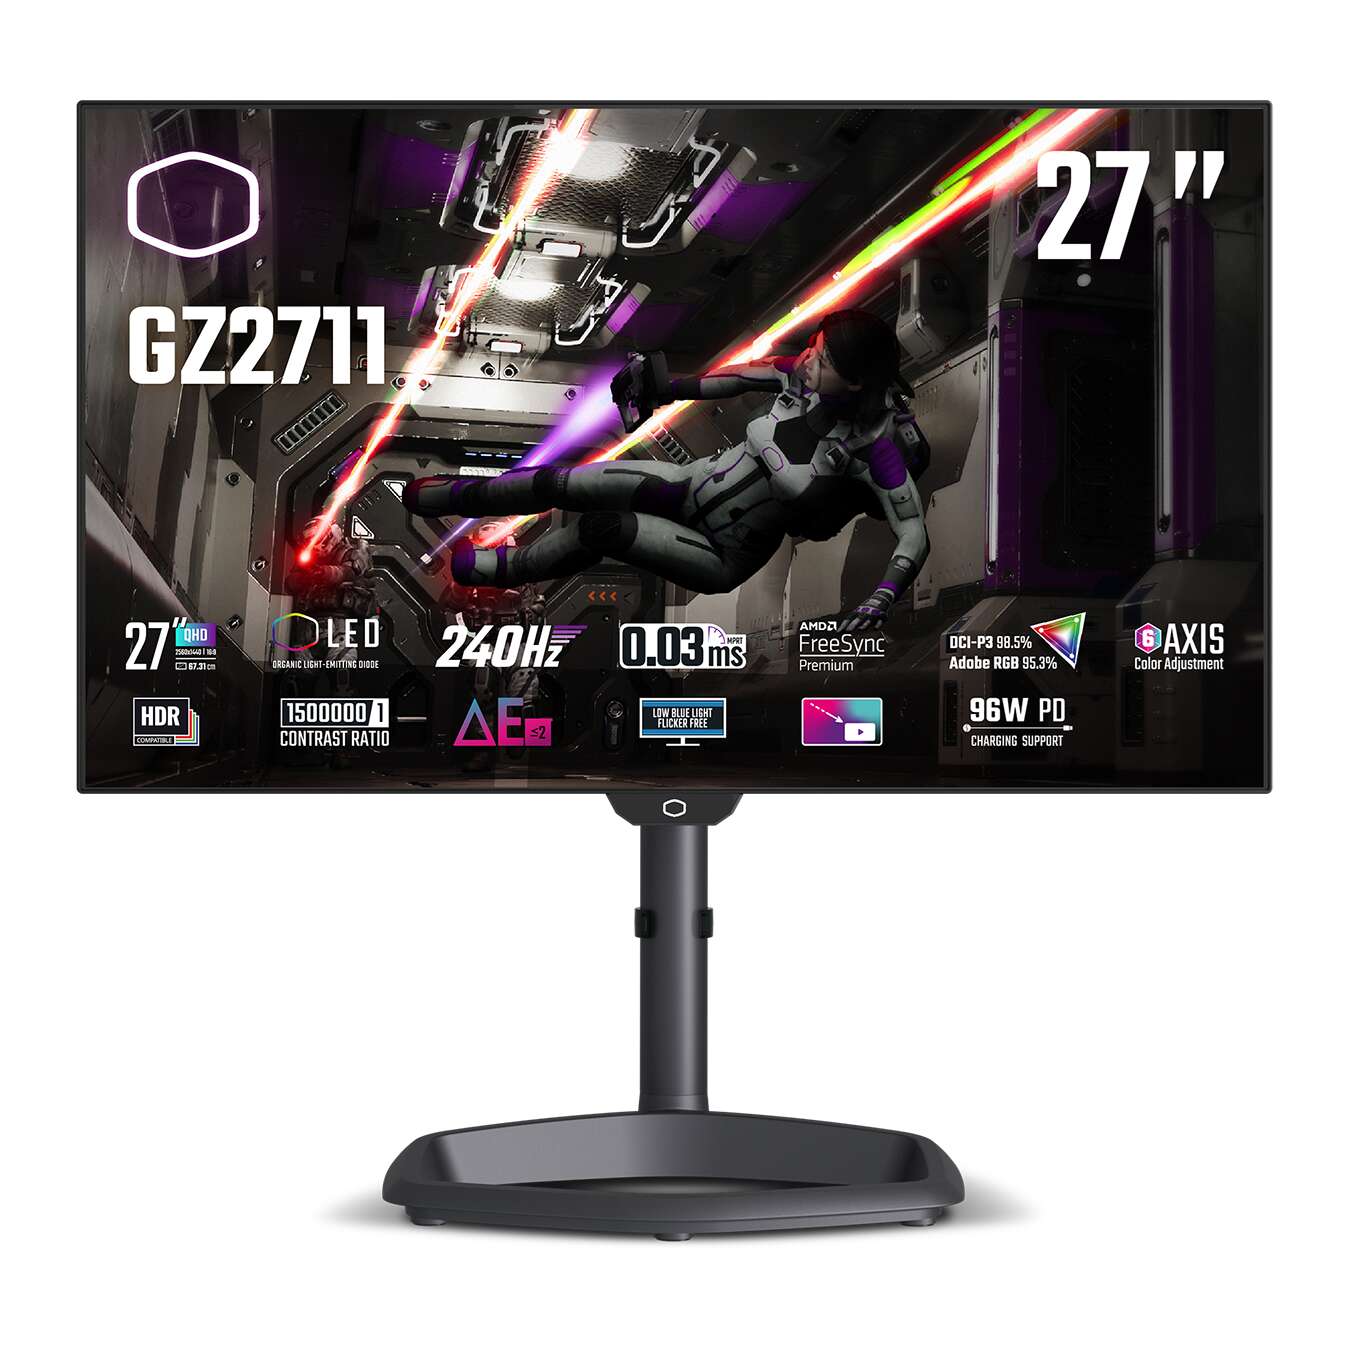 Cooler master 27" tempest gz2711 gaming monitor